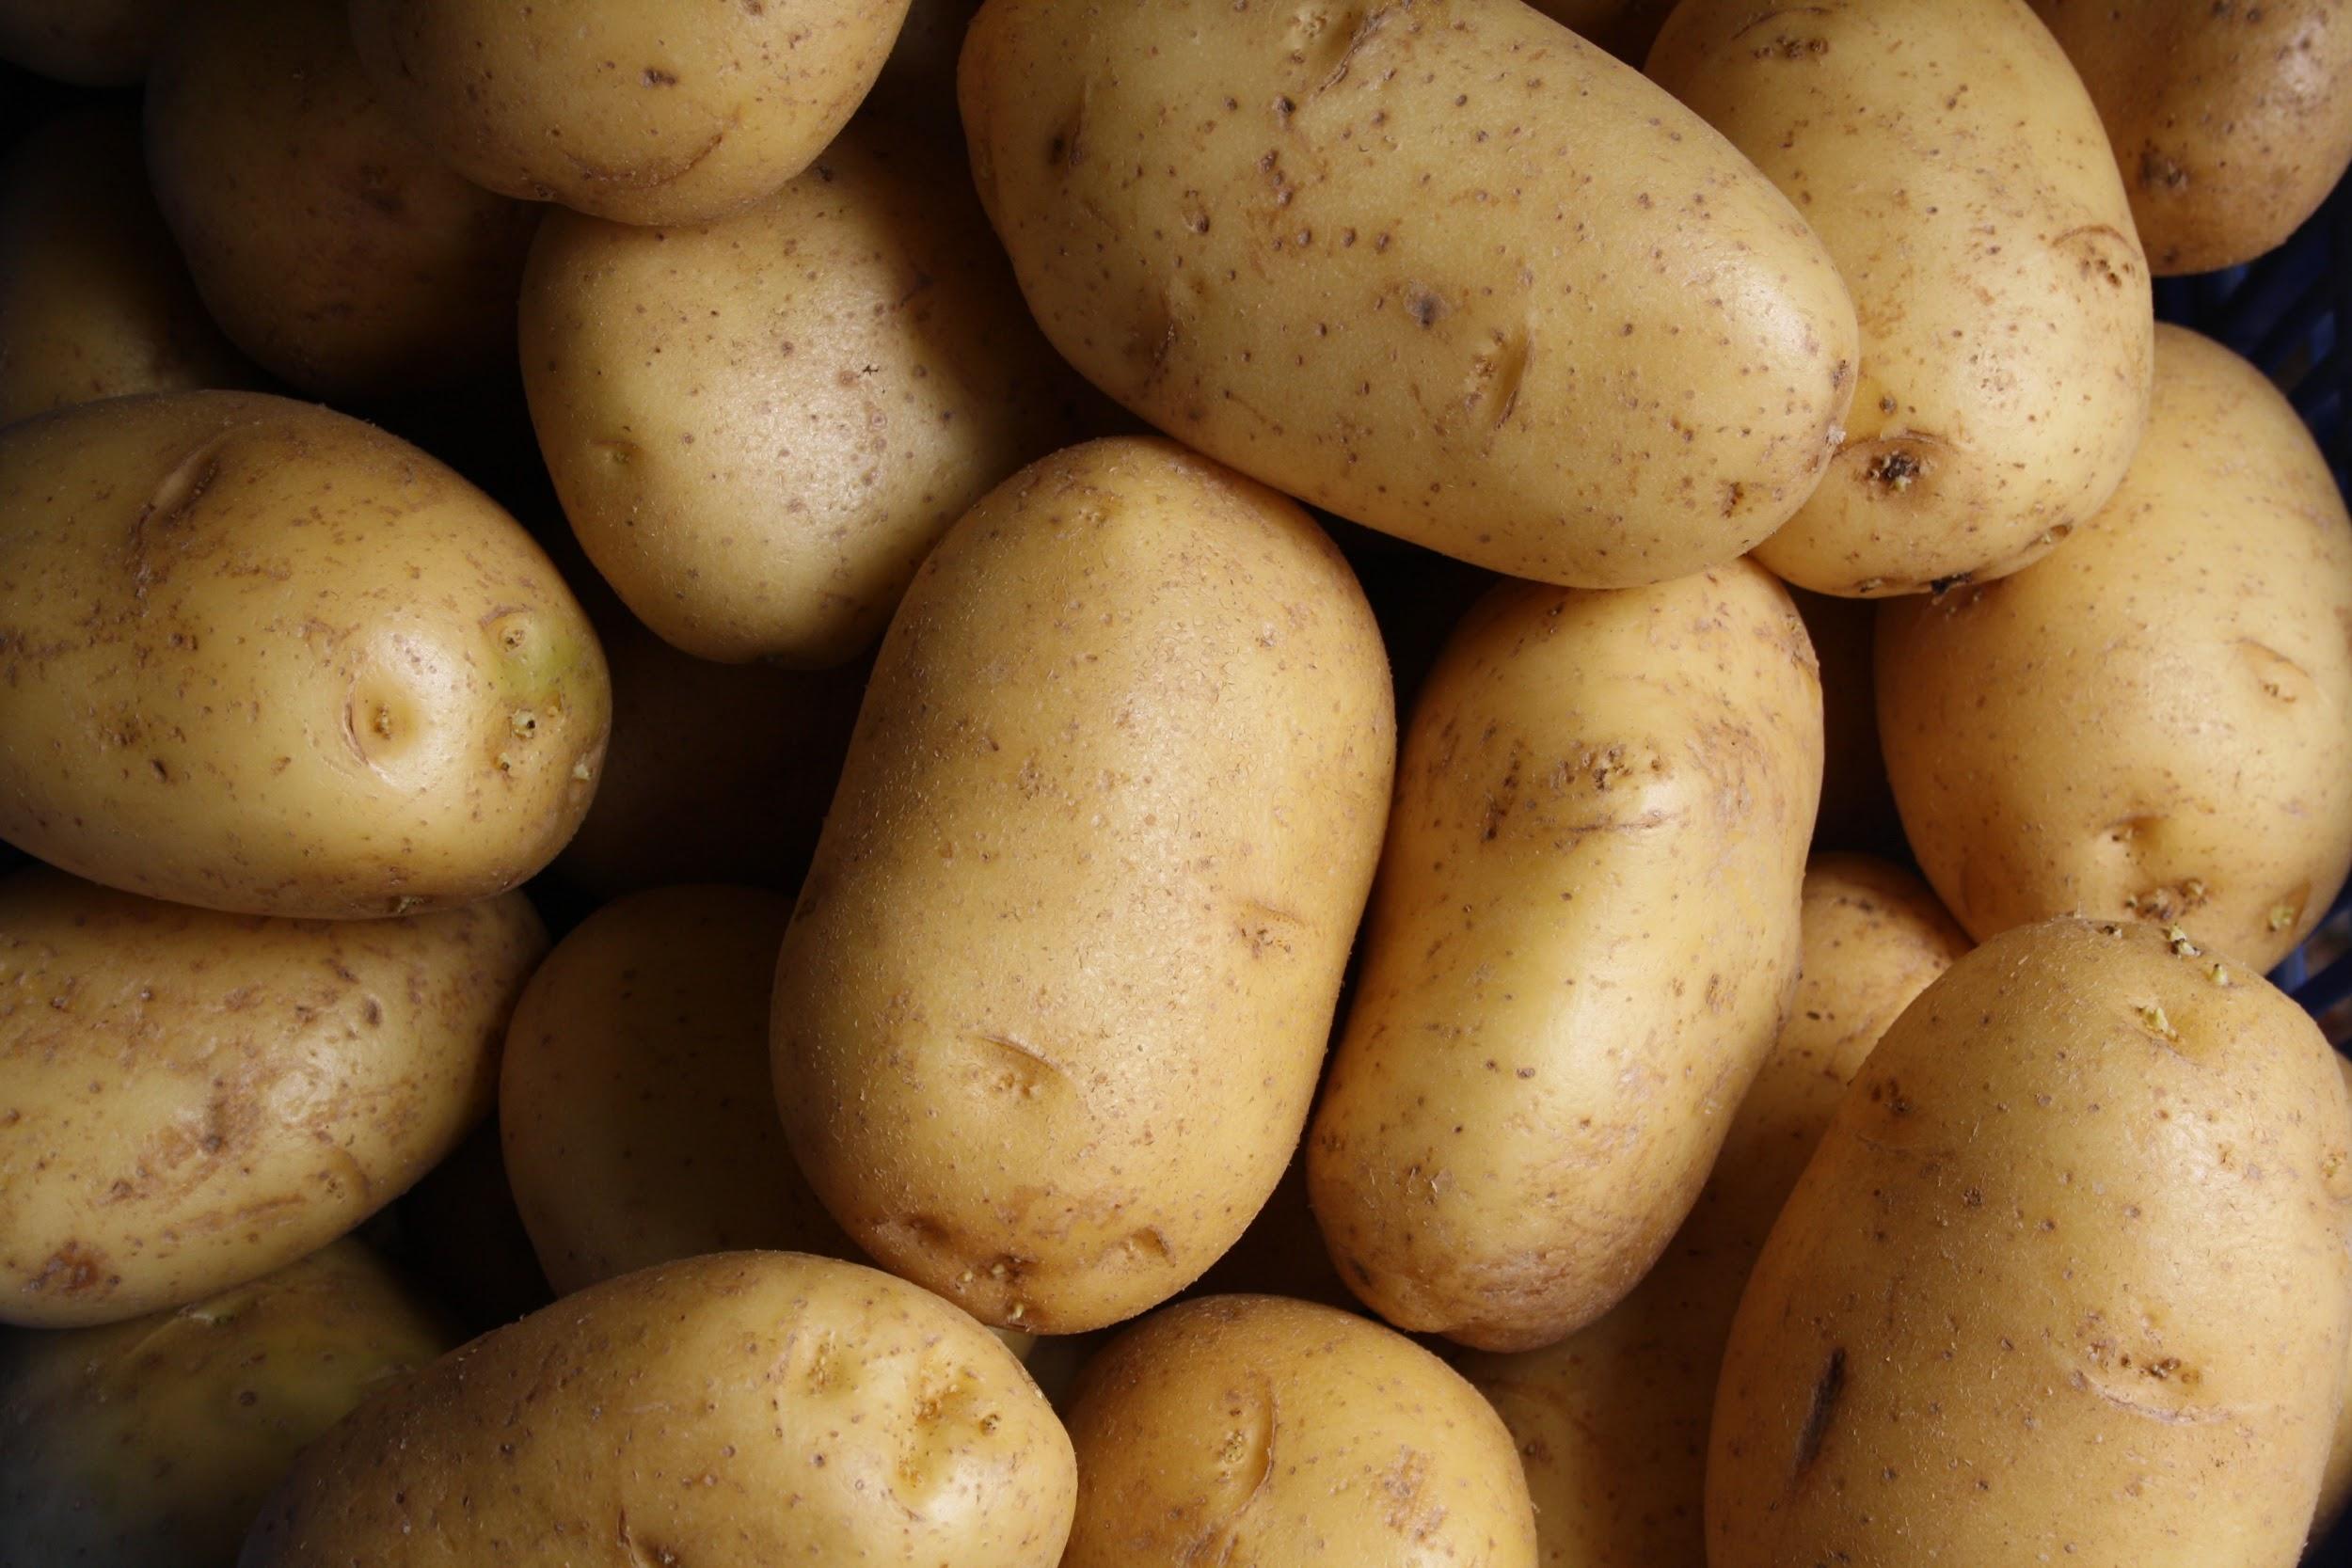 white potatoes: which vegetables do studies show are the best for you